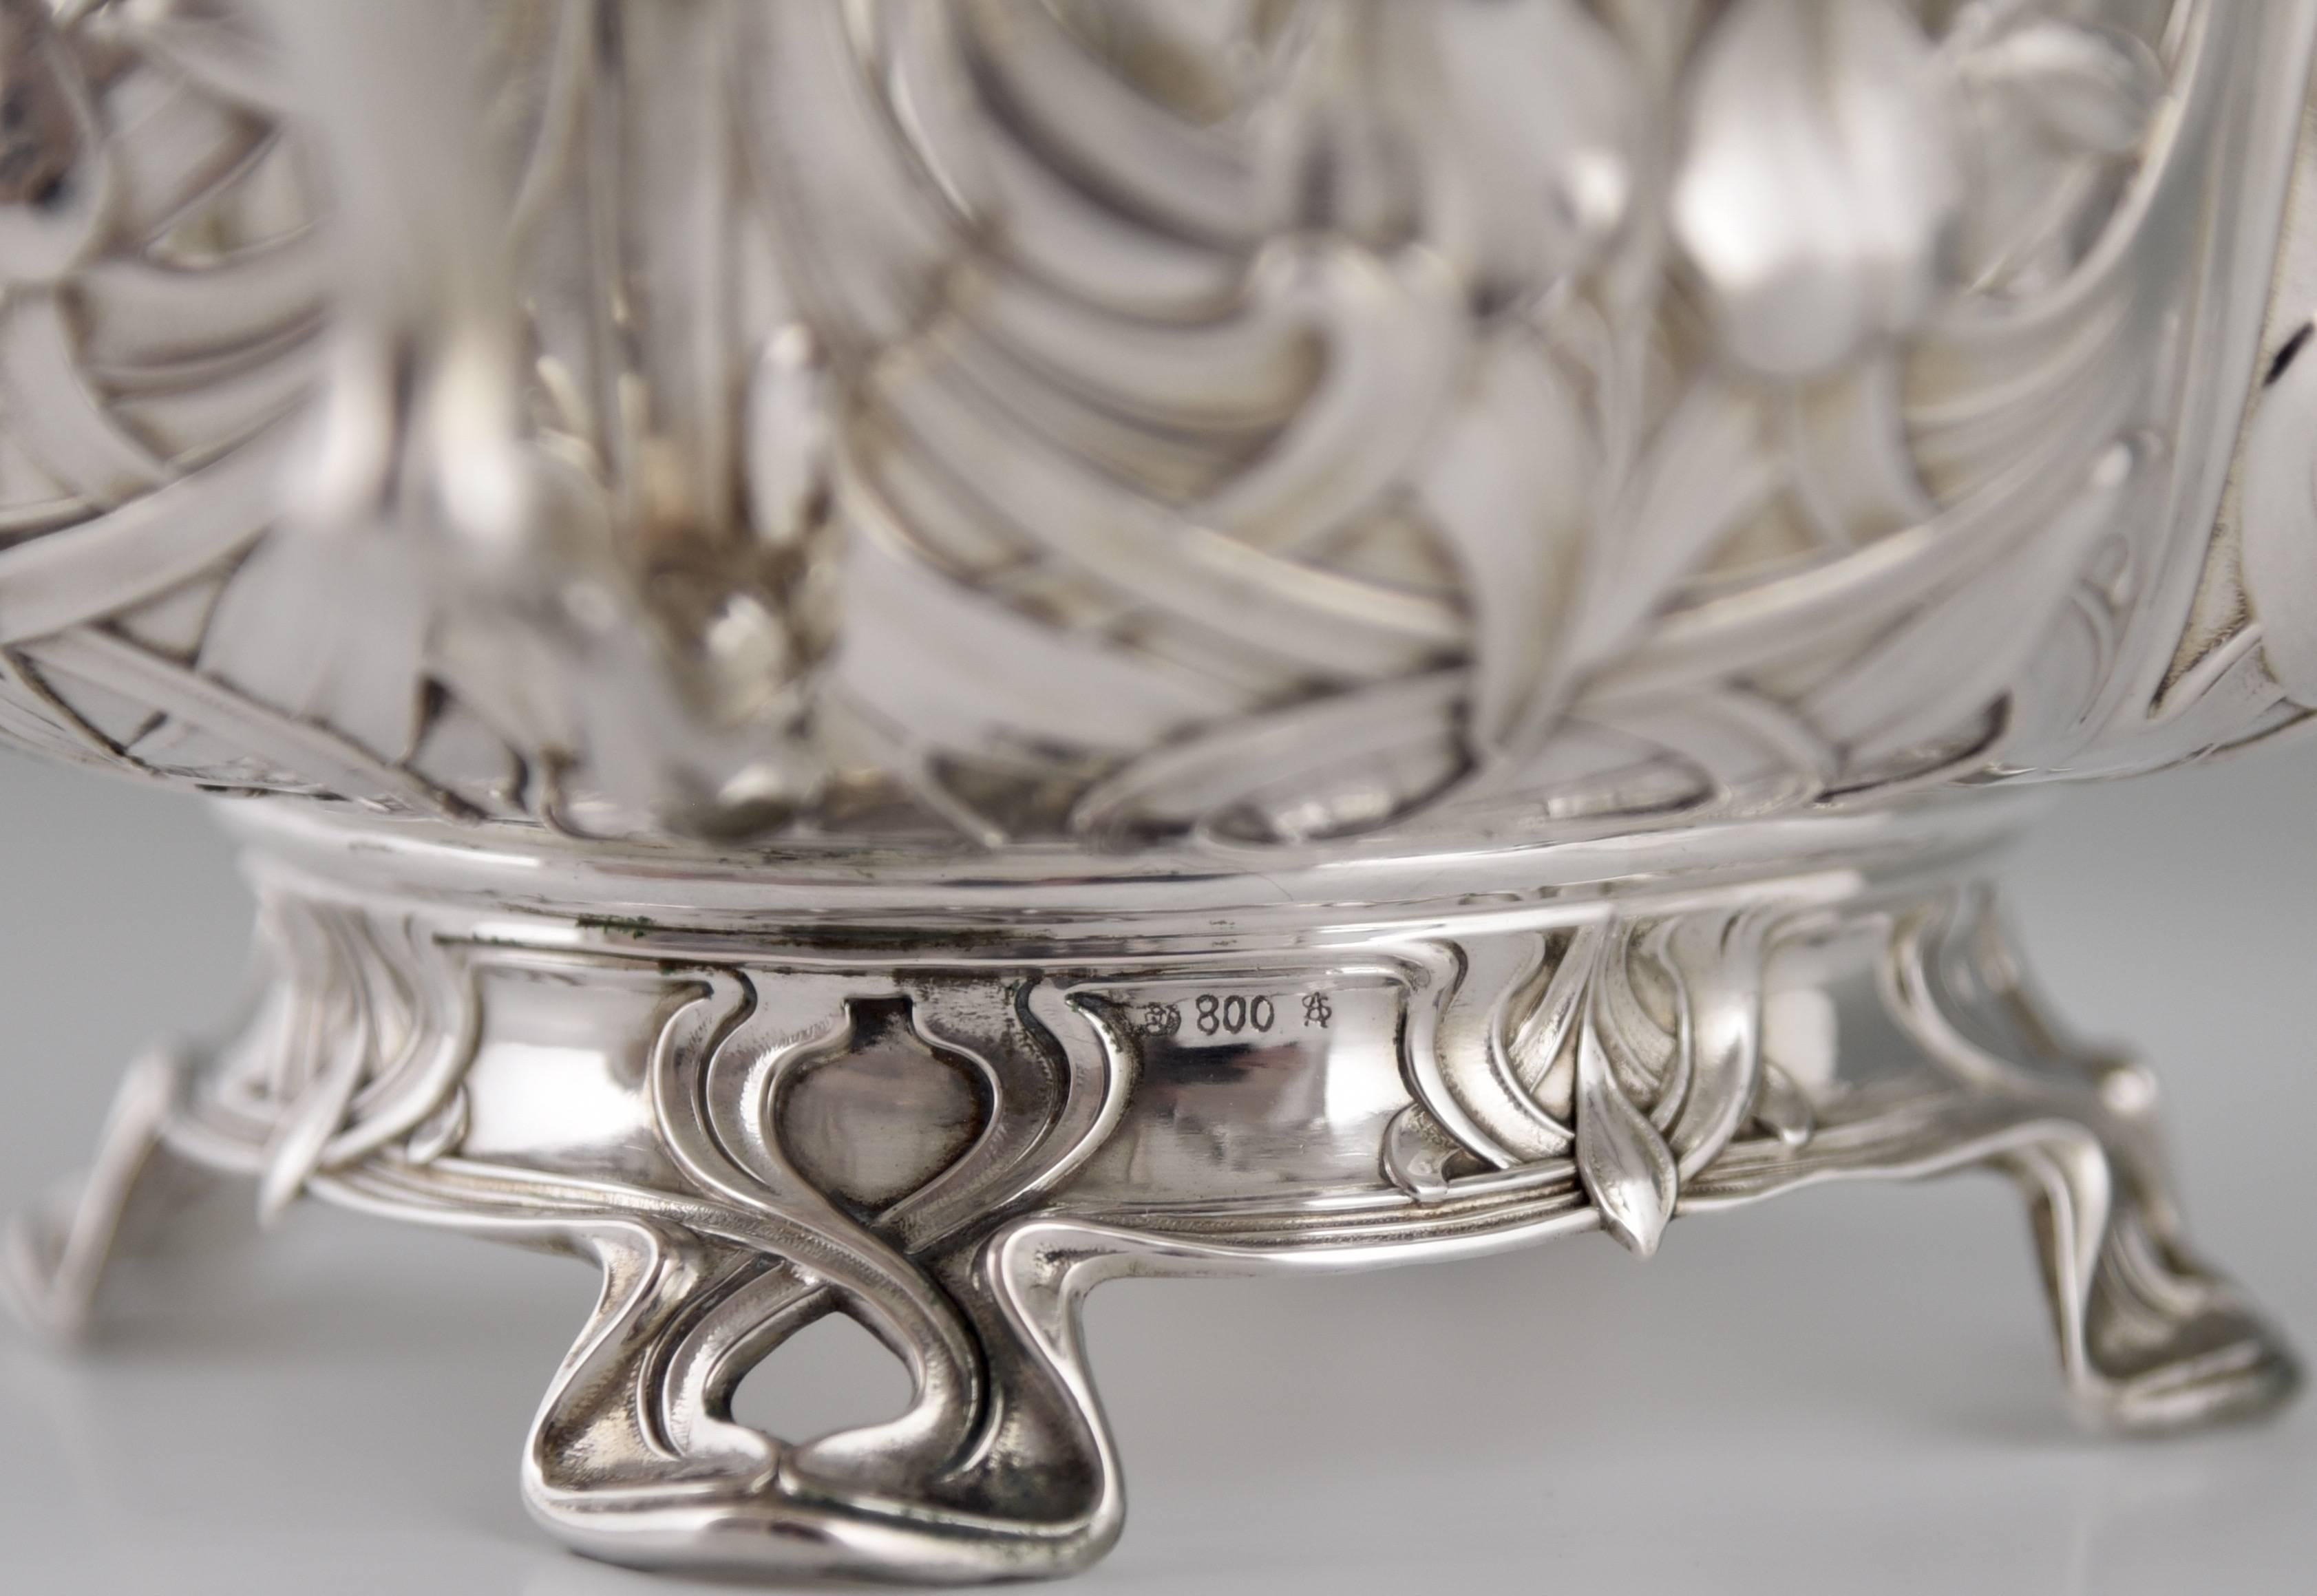 German Art Nouveau silver flower dish with glass liner by A. Strobl, 1900. 1